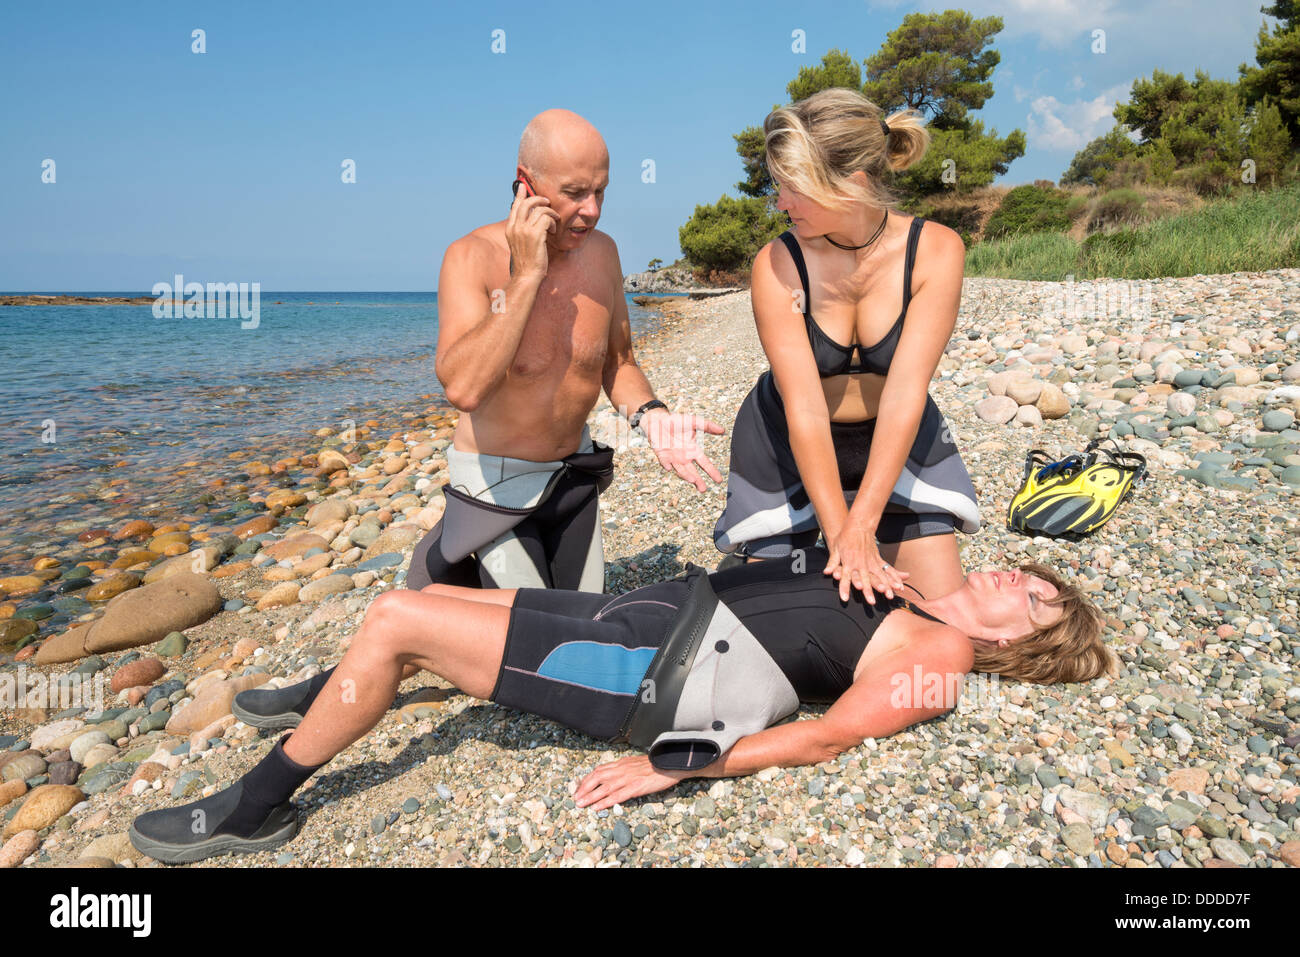 CPR training on a scuba diver on a beach Stock Photo